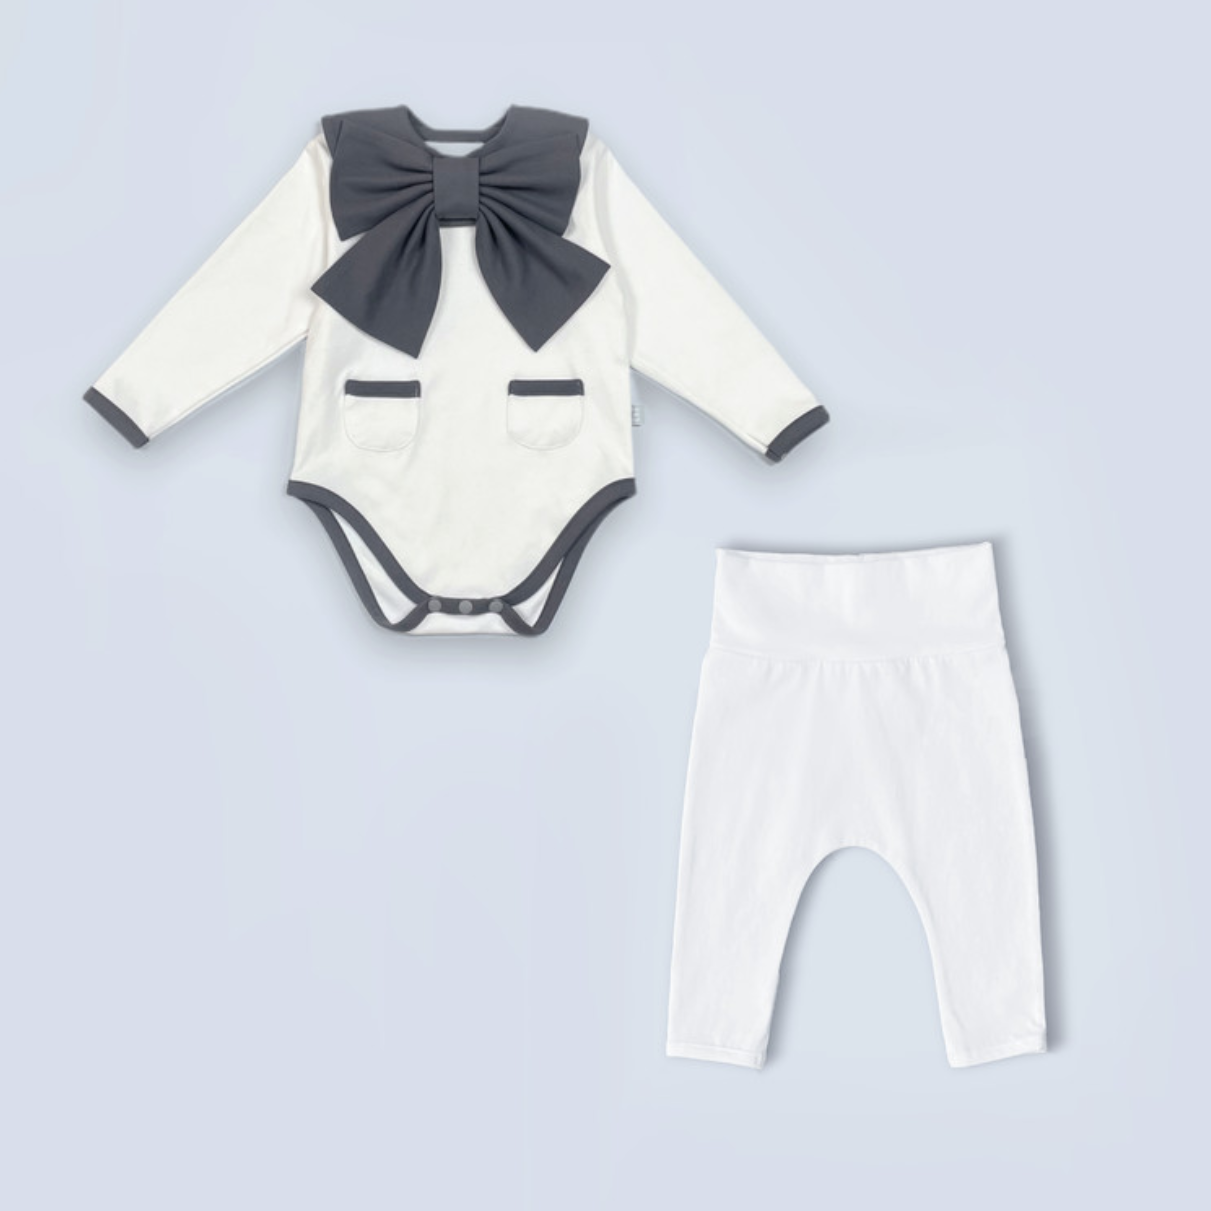 Dress Up Bodysuit Long Sleeve + Pants SET (Off White): Minimalistic design with contrasting lines, ribbon scarf bib, and adorable pocket details.